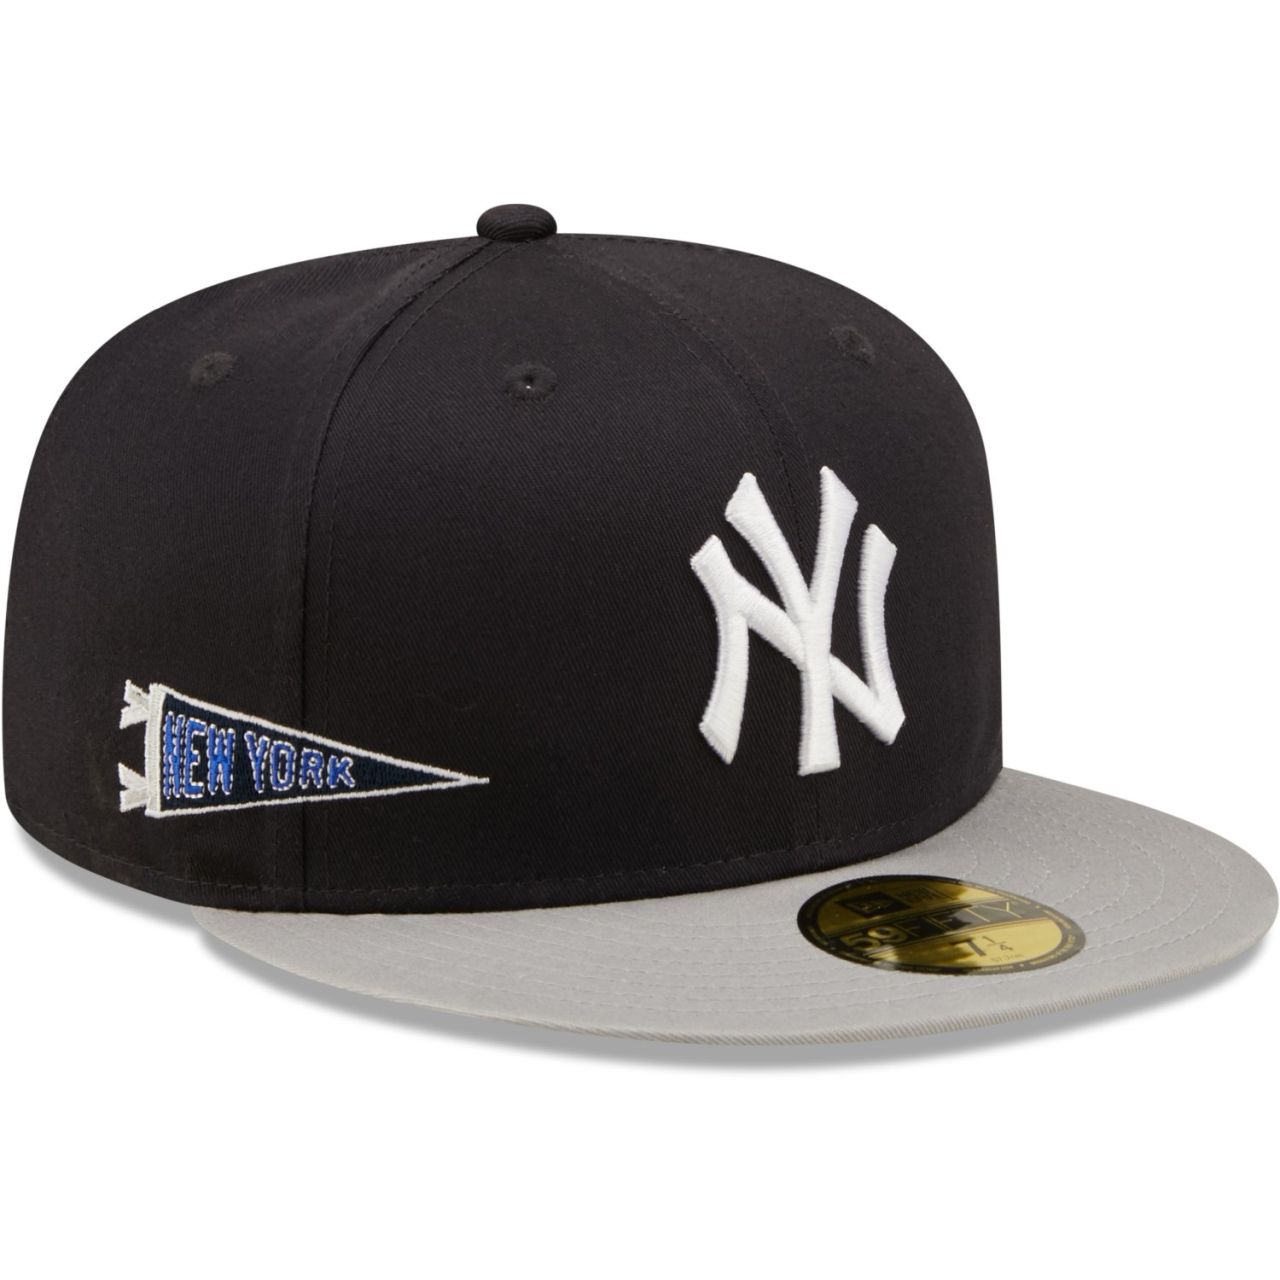 New Era 59Fifty Fitted Cap - CITY PATCH New York Yankees von New Era